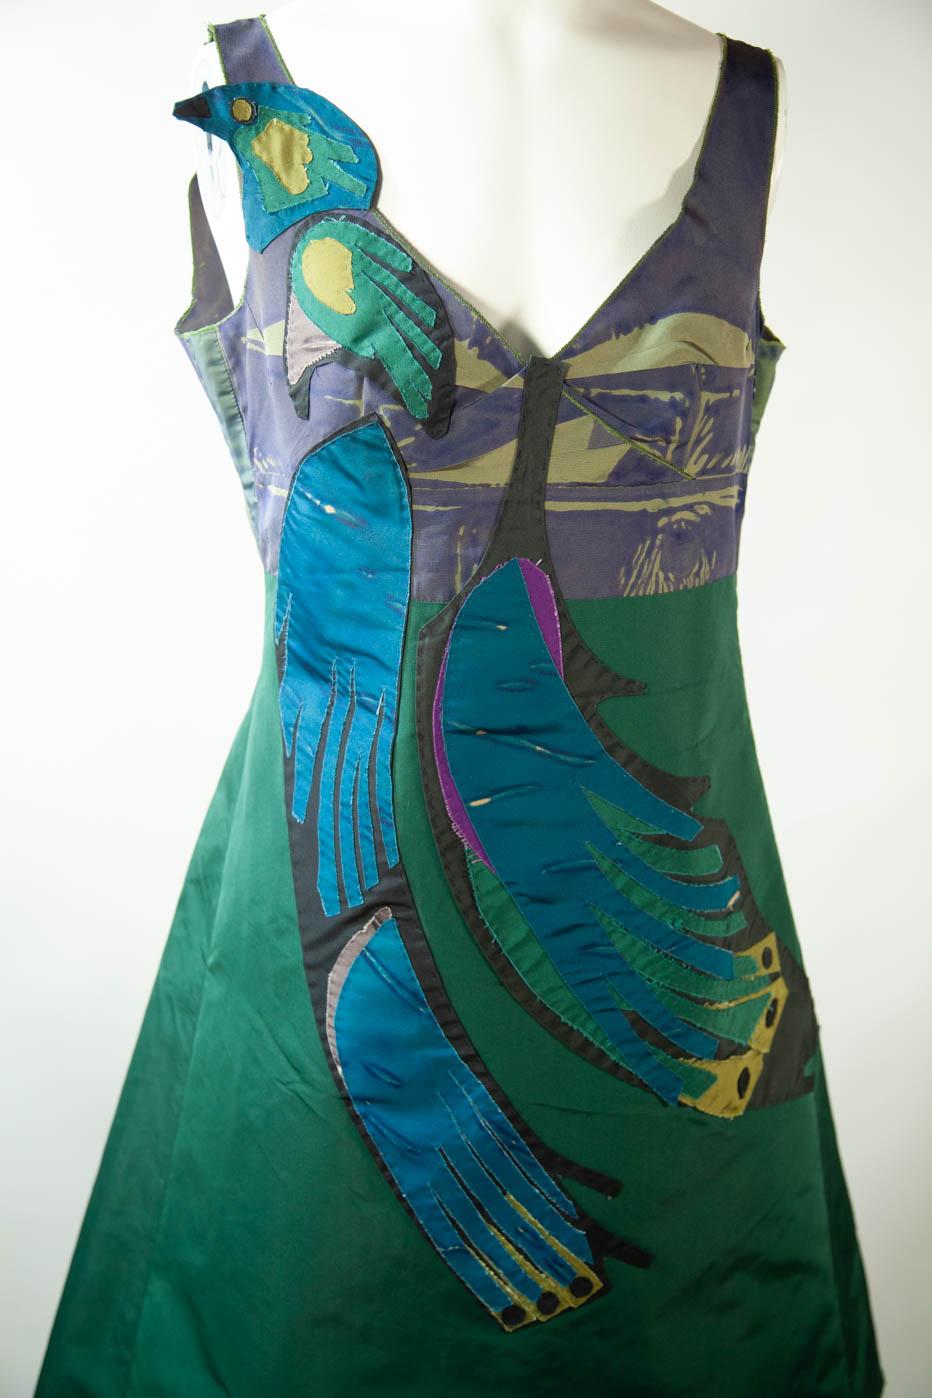 Prada, Silk Peacock Appliqué, Limited Ed. Runway Collection Dress, S/S 2005 For Sale 1